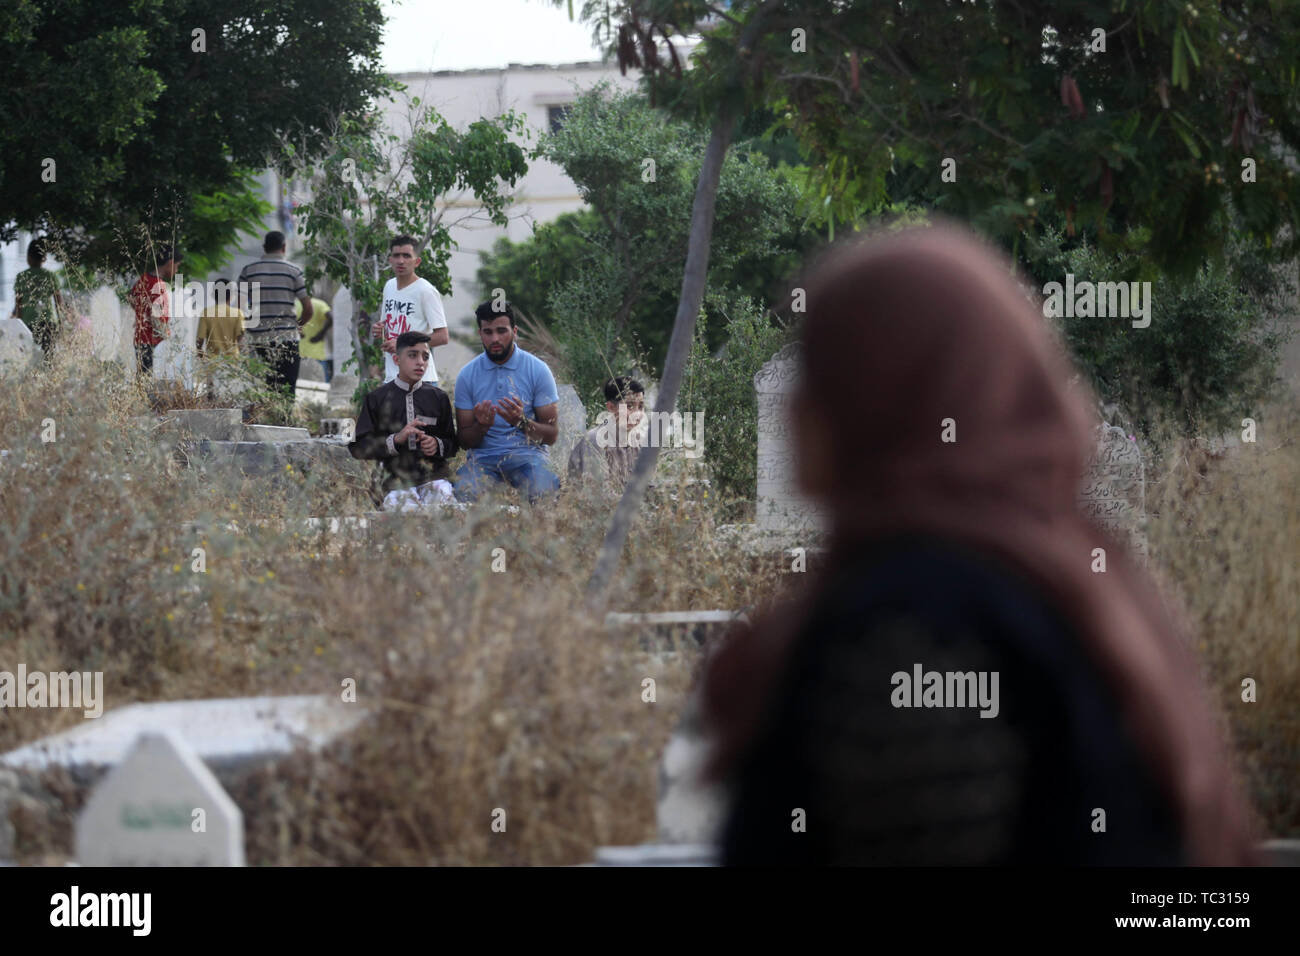 Gaza, Gaza Strip, Palestinian Territory. 5th June, 2019. Palestinians visit the graves of their relatives at a cemetery during the first day of Eid al-Fitr holiday which marks the end of the Muslim holy month of Ramadan, in Gaza city on June 5, 2019 Credit: Mahmoud Ajjour/APA Images/ZUMA Wire/Alamy Live News Stock Photo